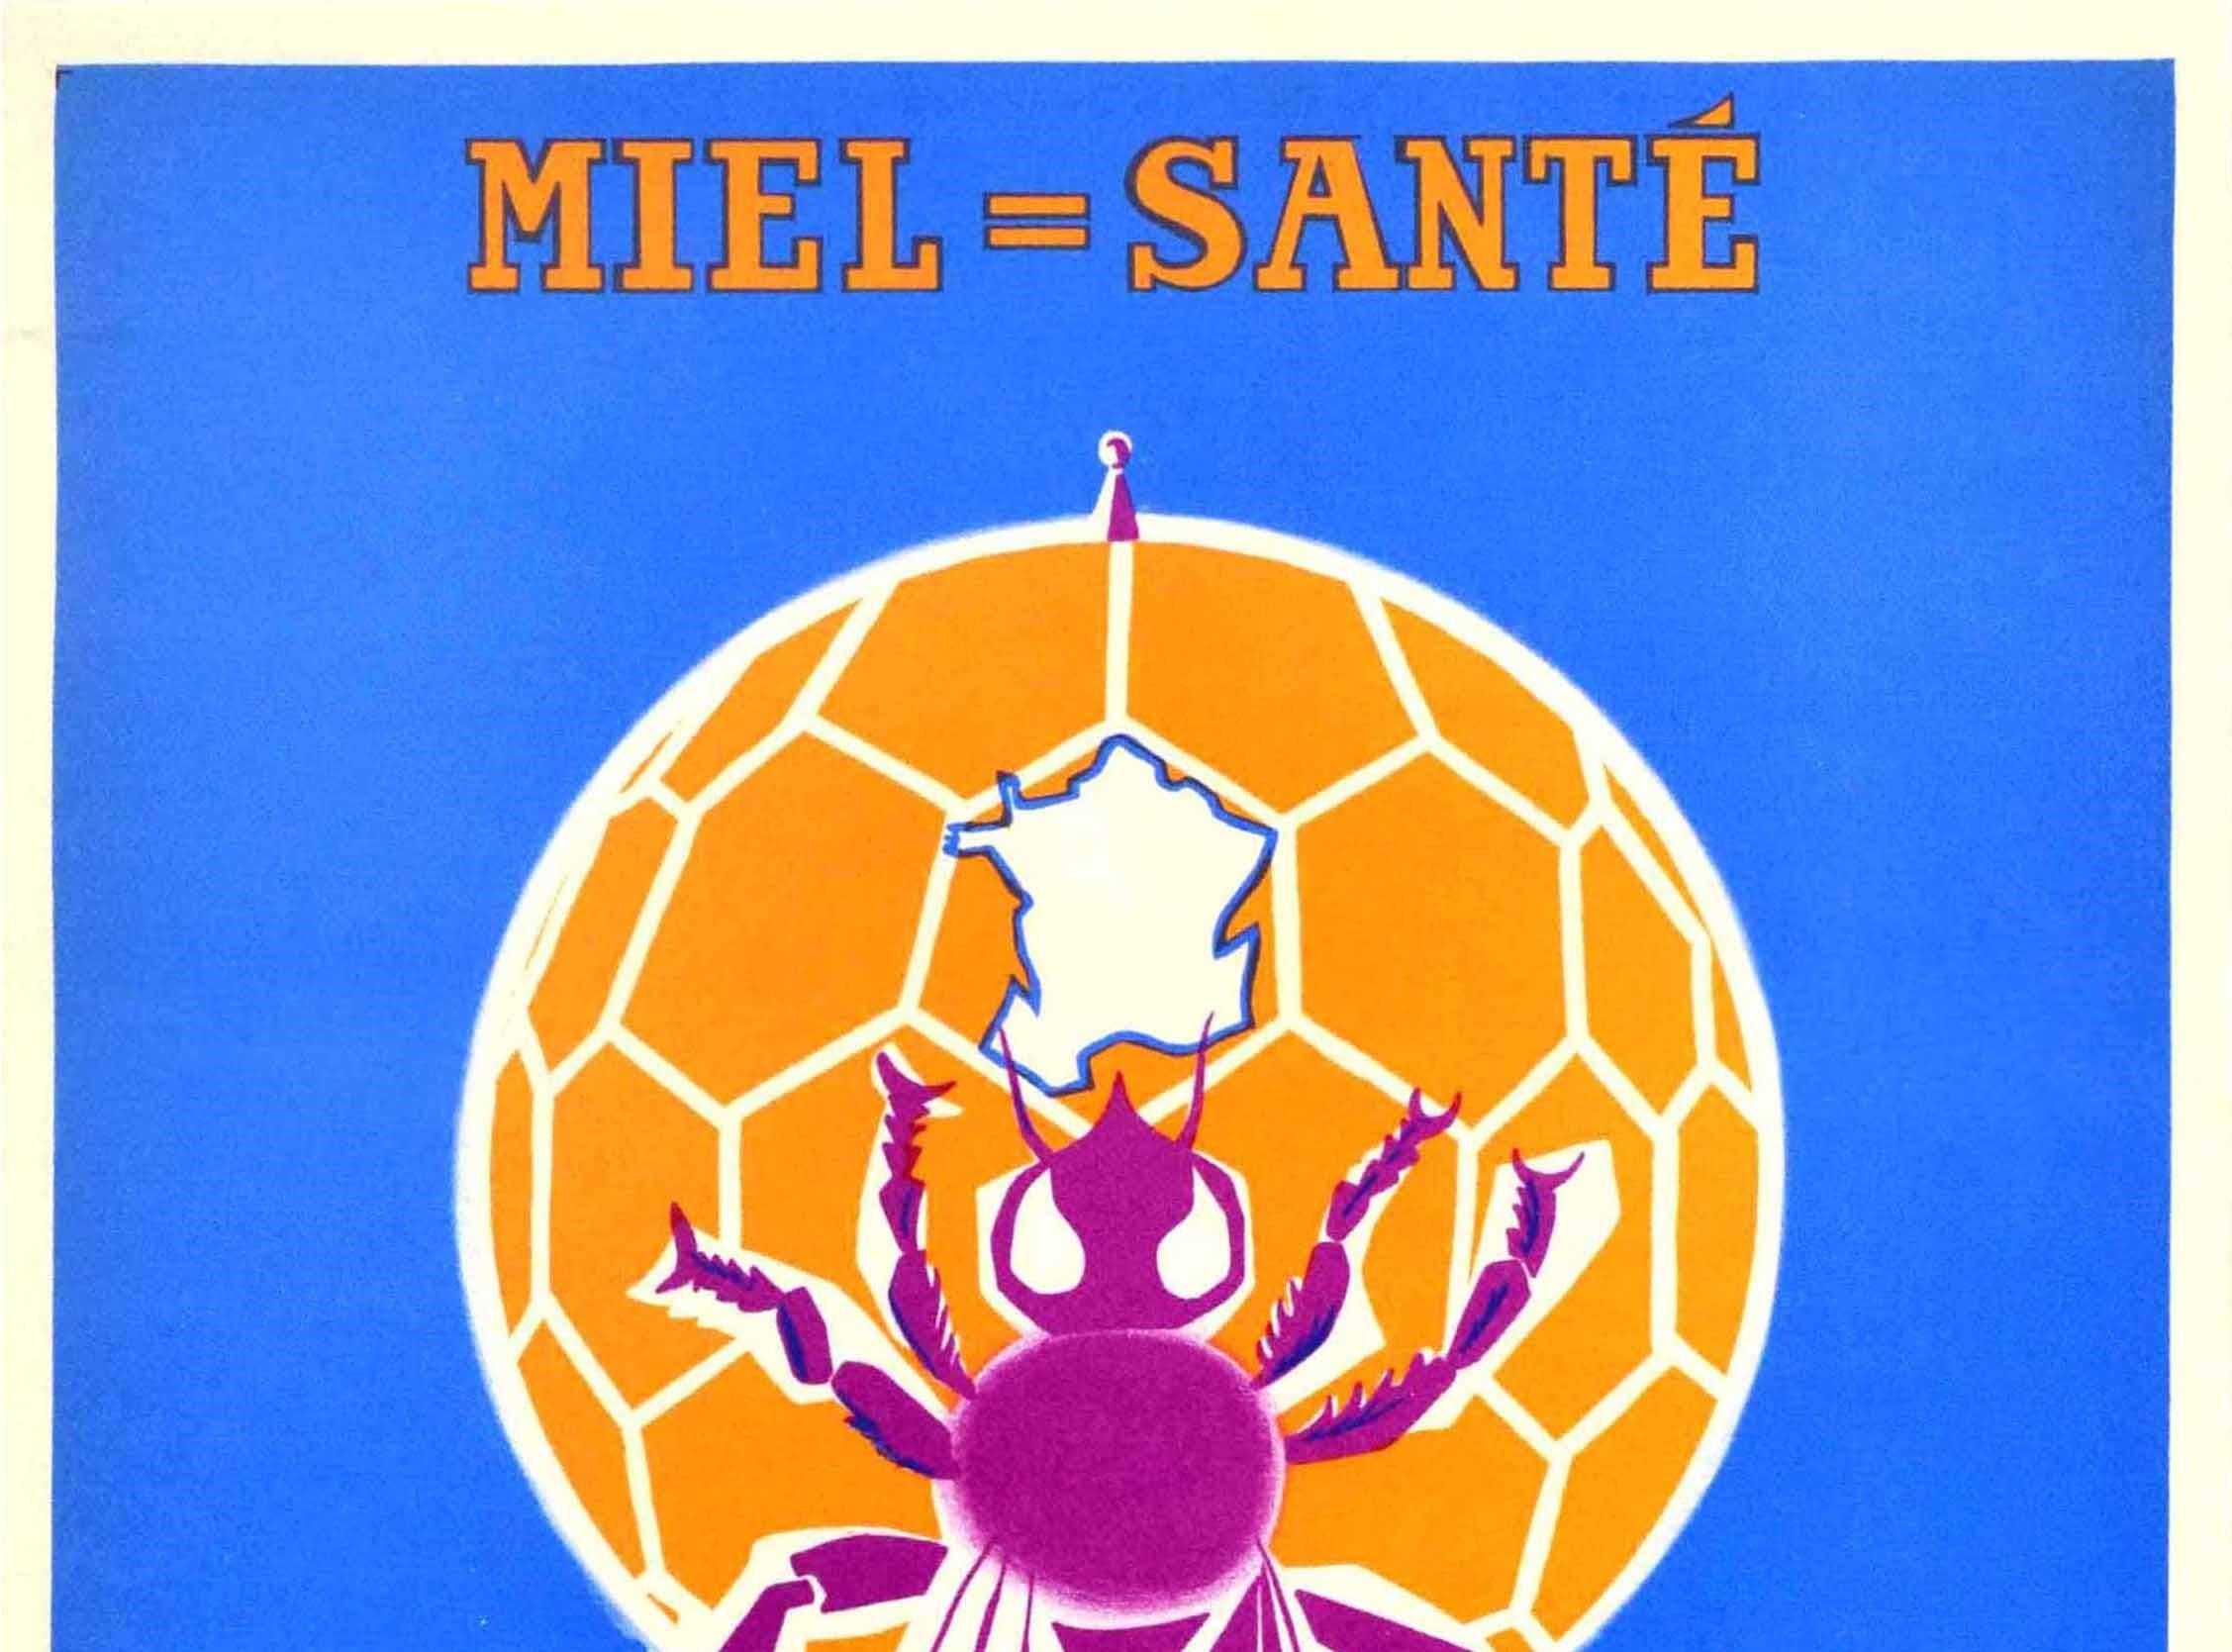 Original vintage food advertising poster for Royal Jelly Honey Pollen / Miel Pollen Gelee Royale featuring a striking image depicting a purple and white bee on a gold globe of the world in a hexagonal honeycomb pattern and an outline of the map of